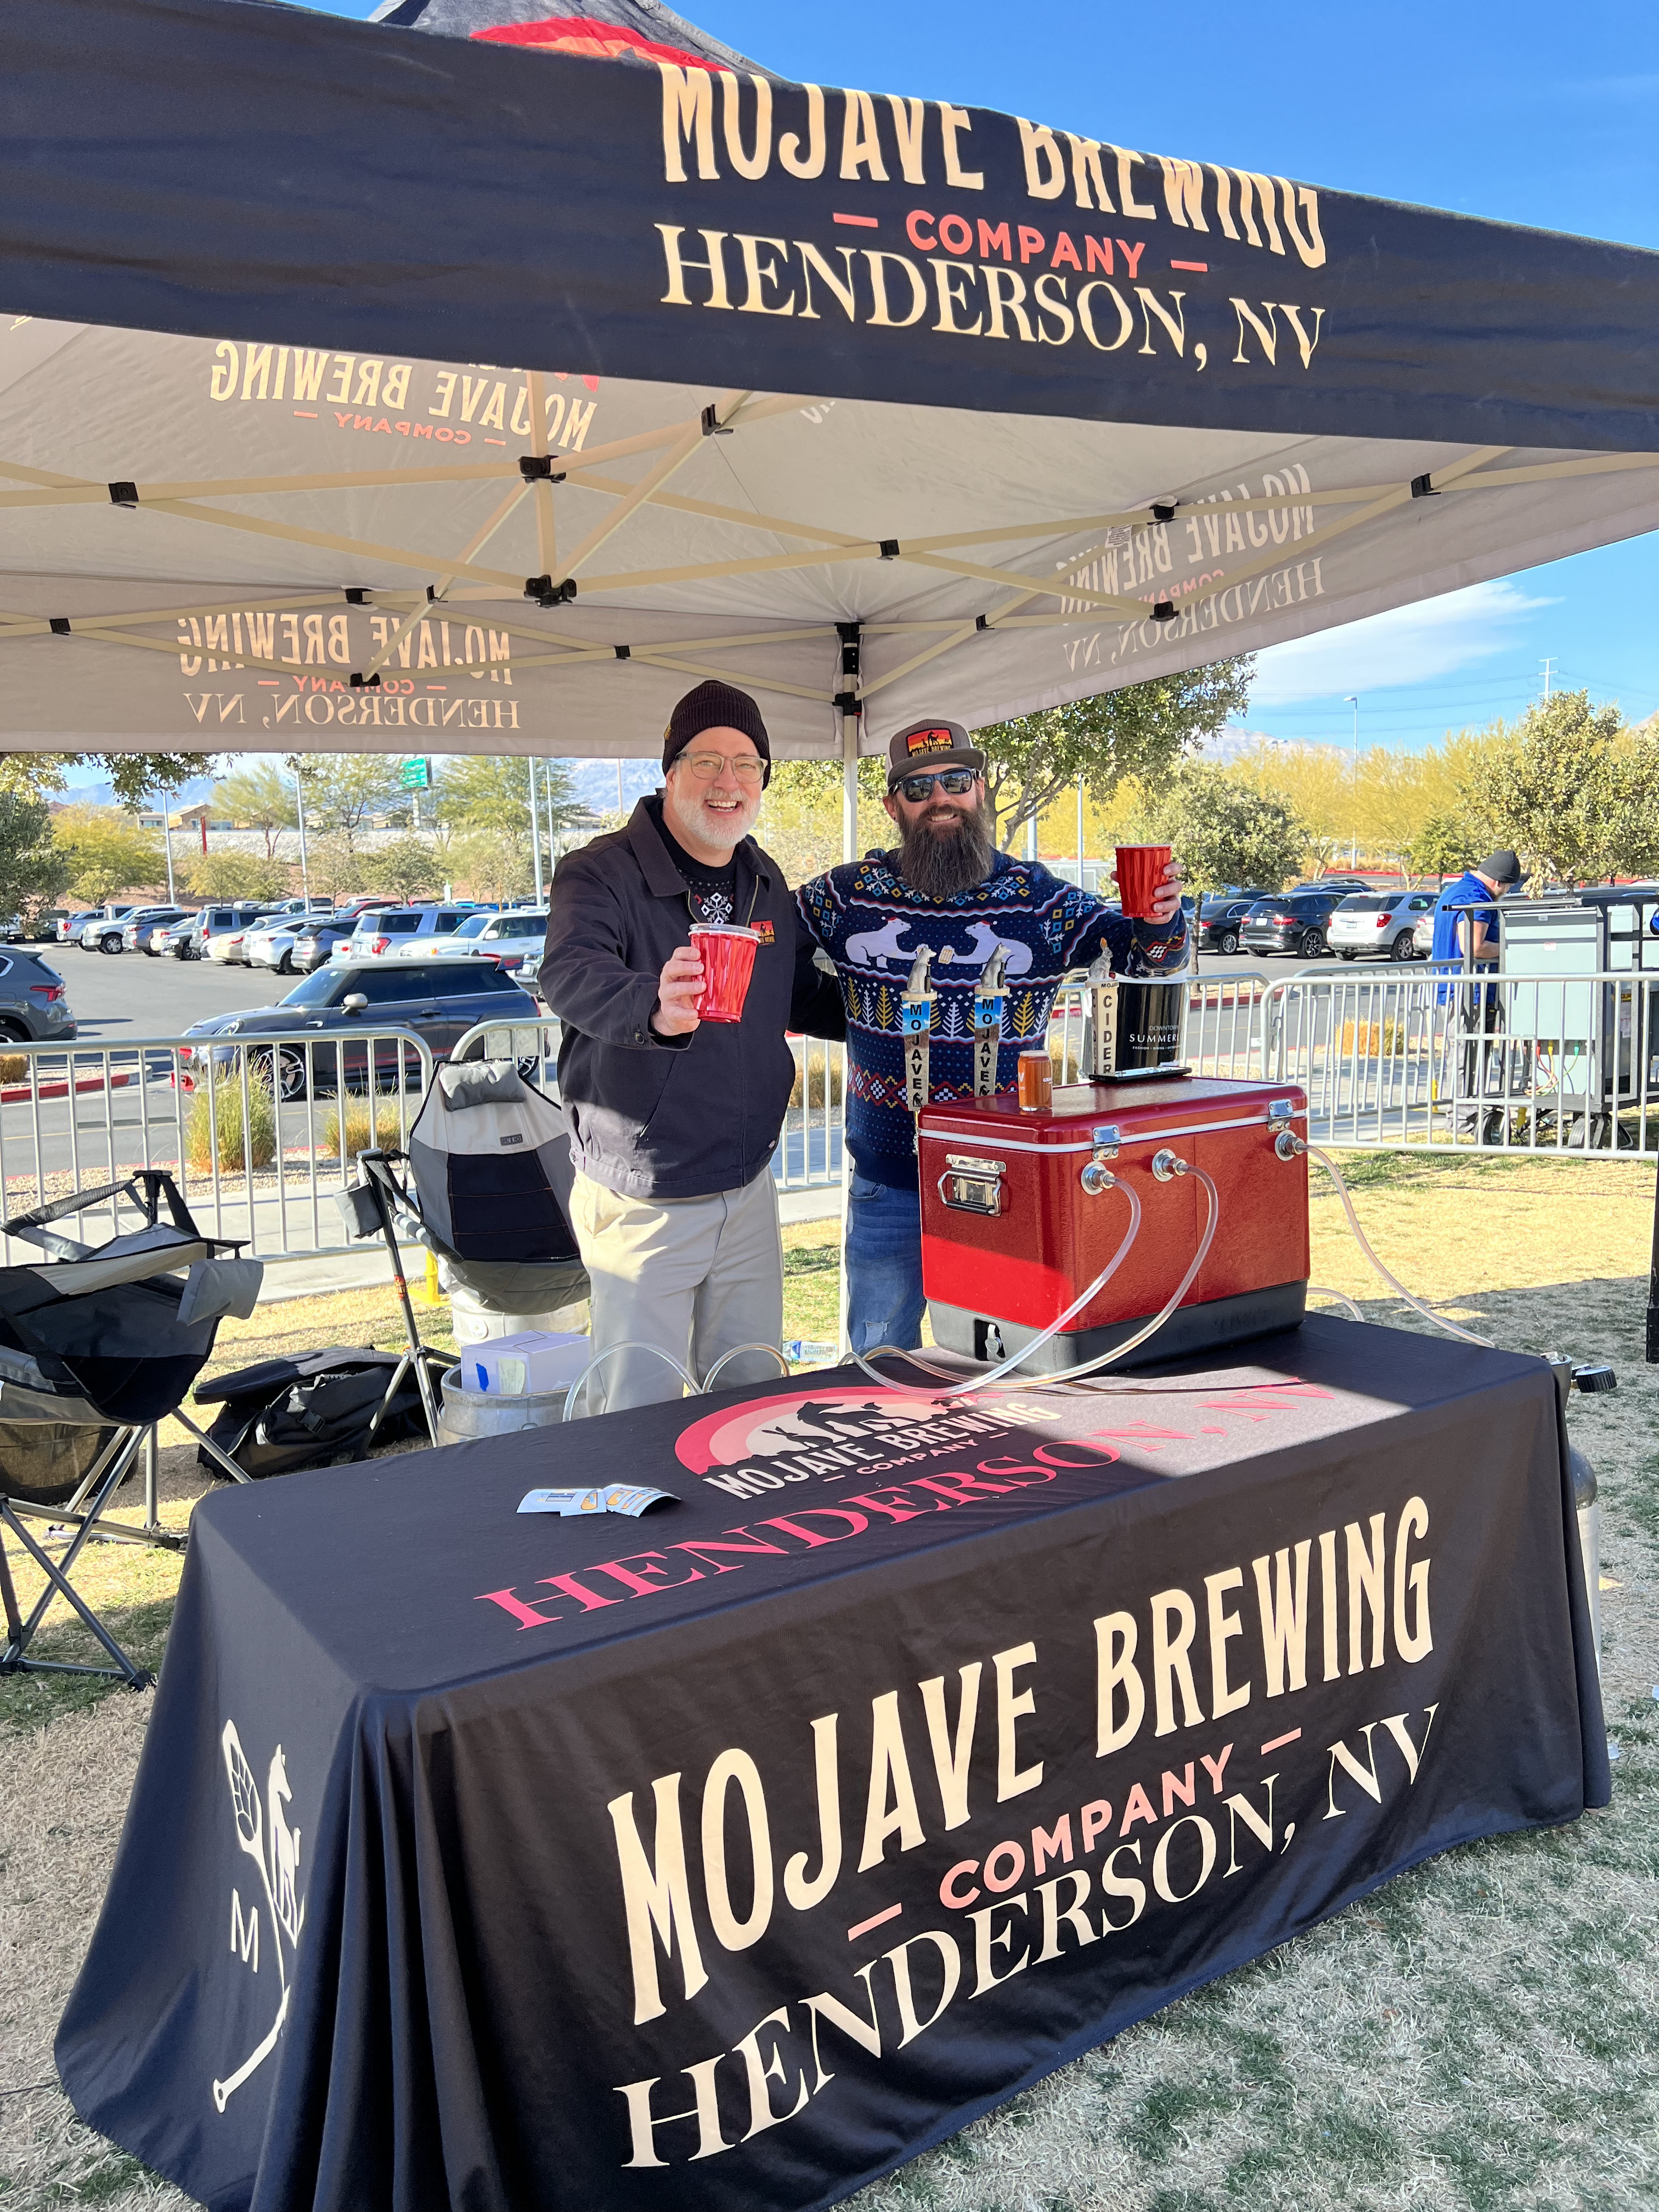 Mojave Brewing booth from Henderson, NV